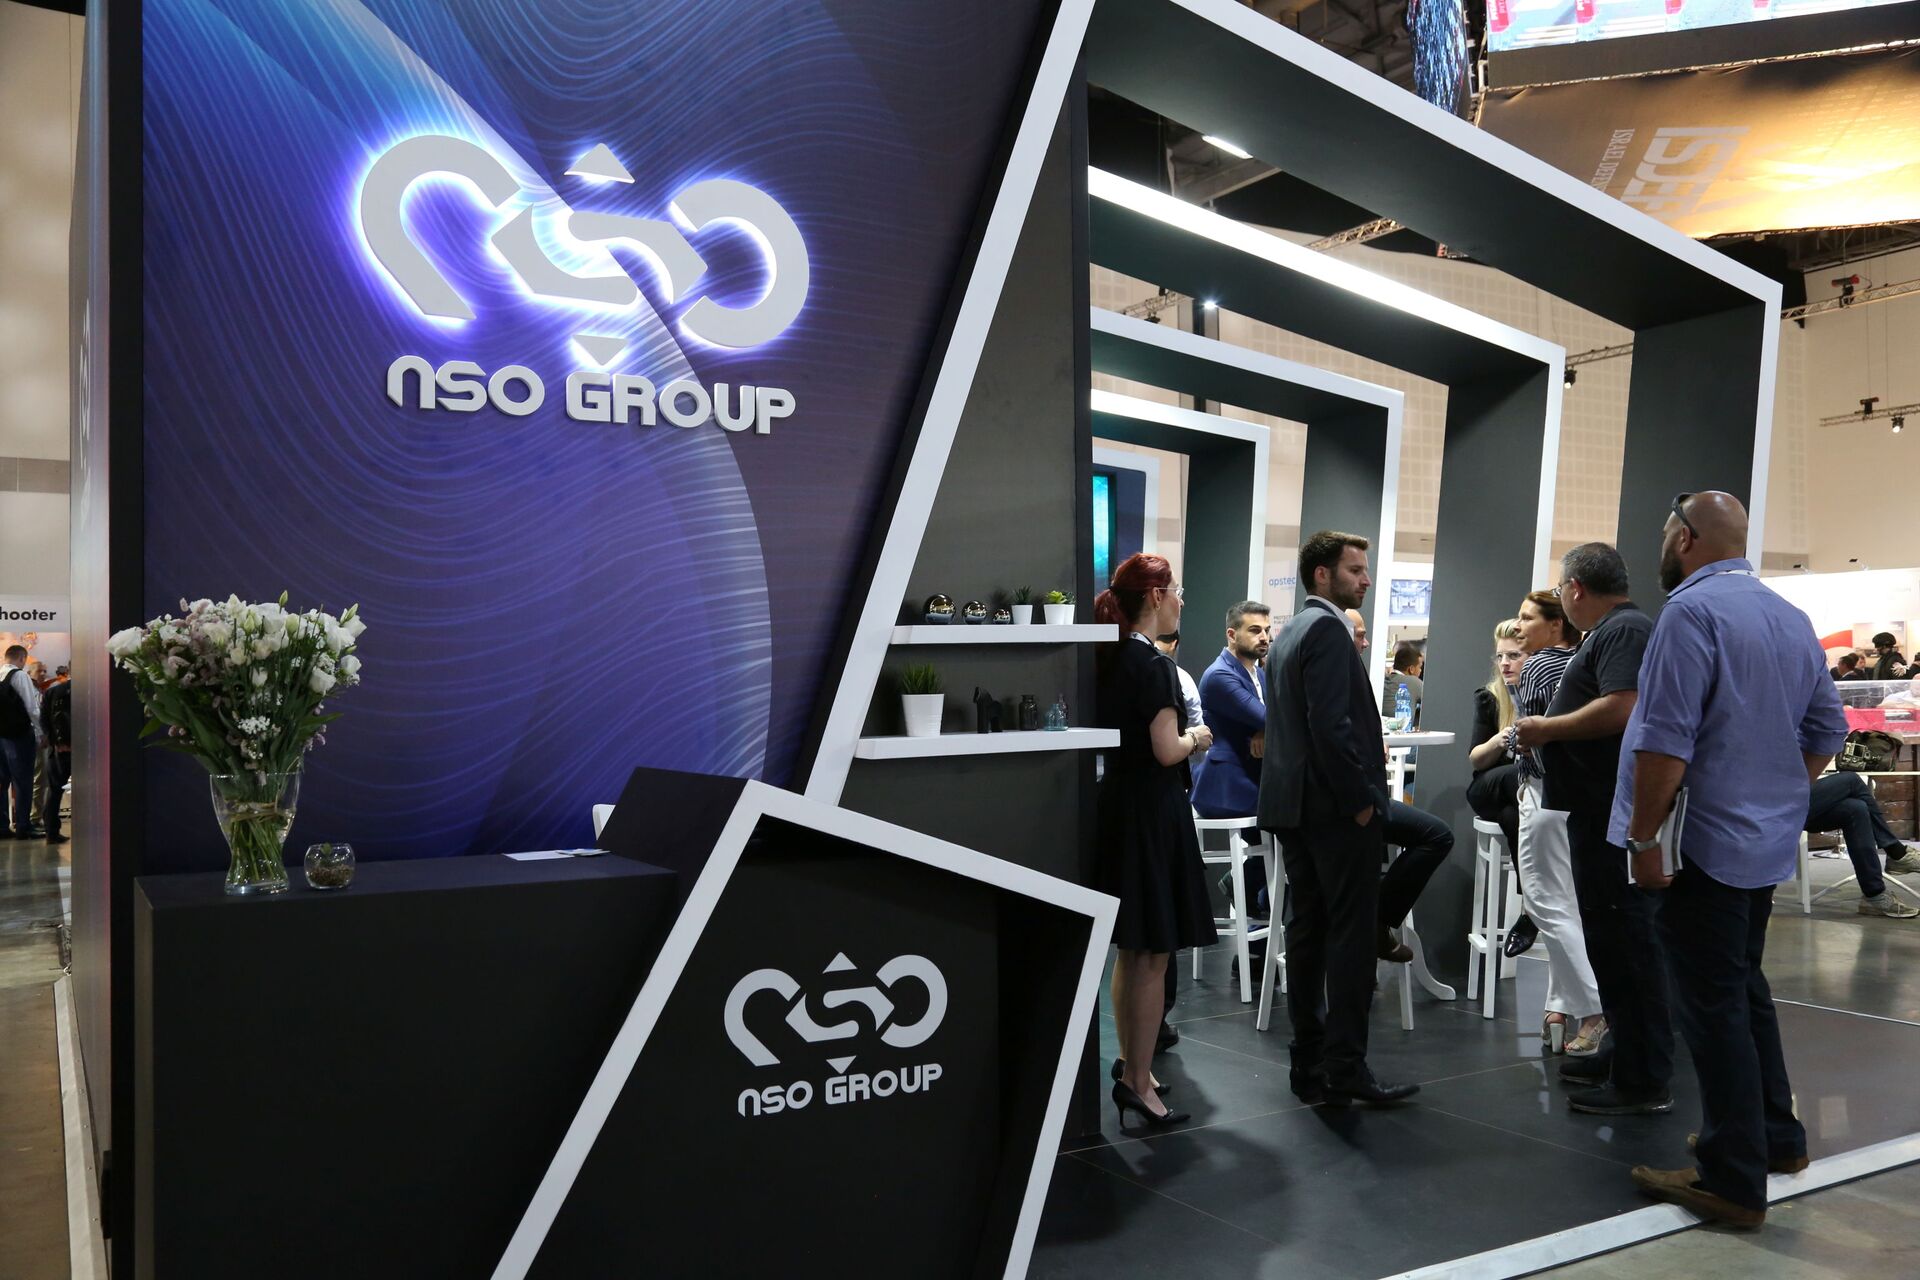 Israeli cyber firm NSO Group's exhibition stand is seen at ISDEF 2019, an international defence and homeland security expo, in Tel Aviv, Israel June 4, 2019. Picture taken June 4, 2019. - Sputnik International, 1920, 07.09.2021